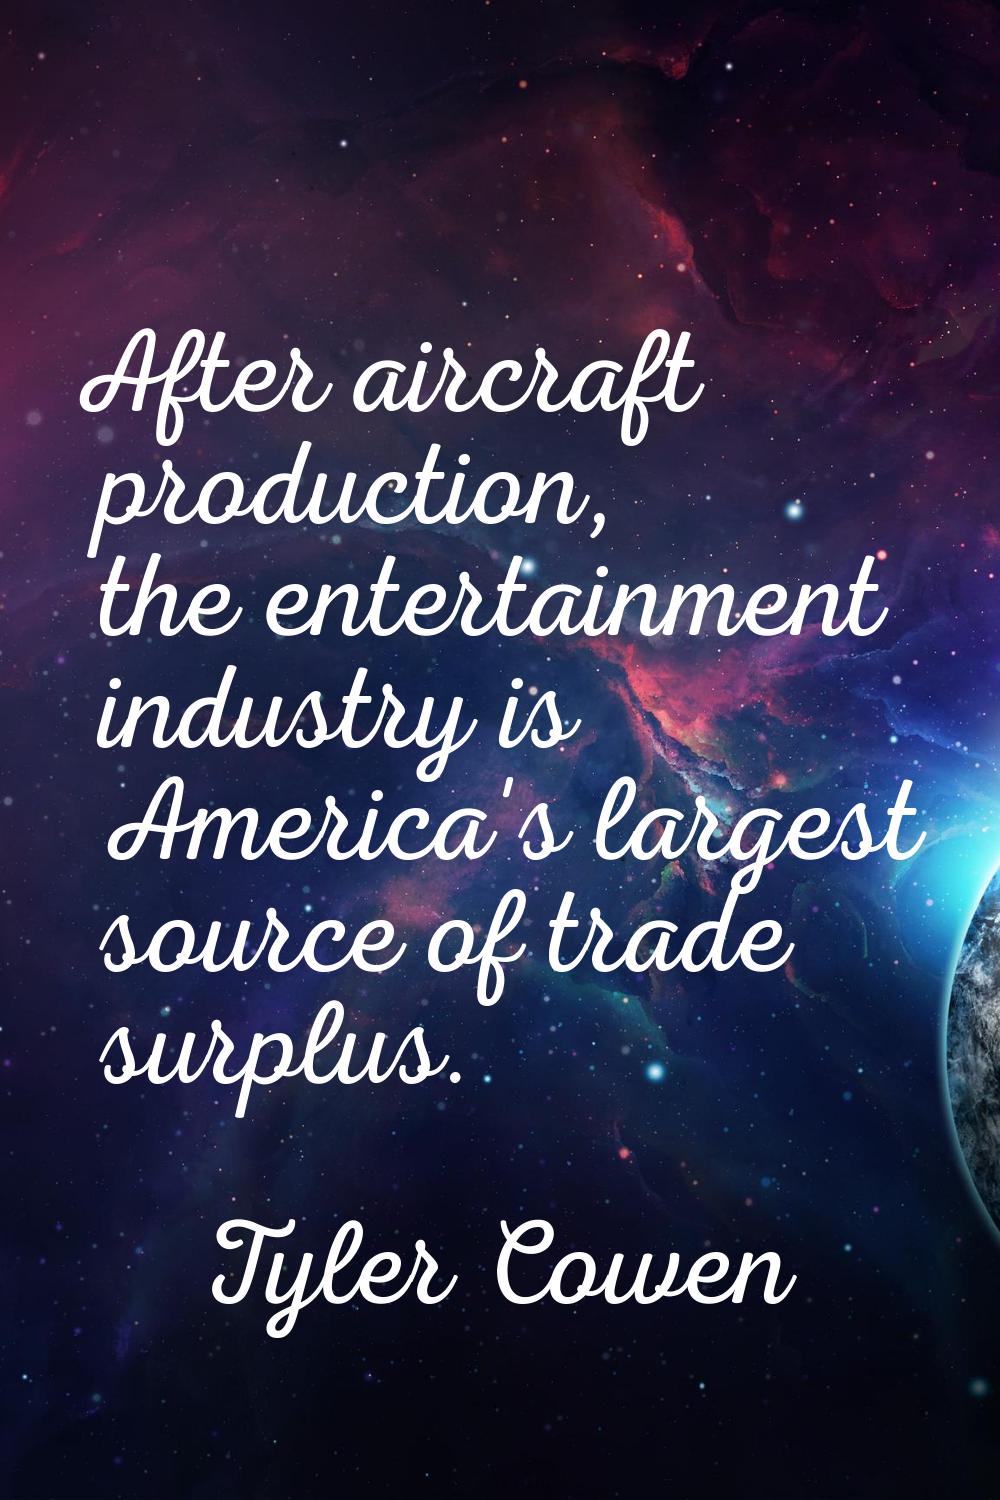 After aircraft production, the entertainment industry is America's largest source of trade surplus.